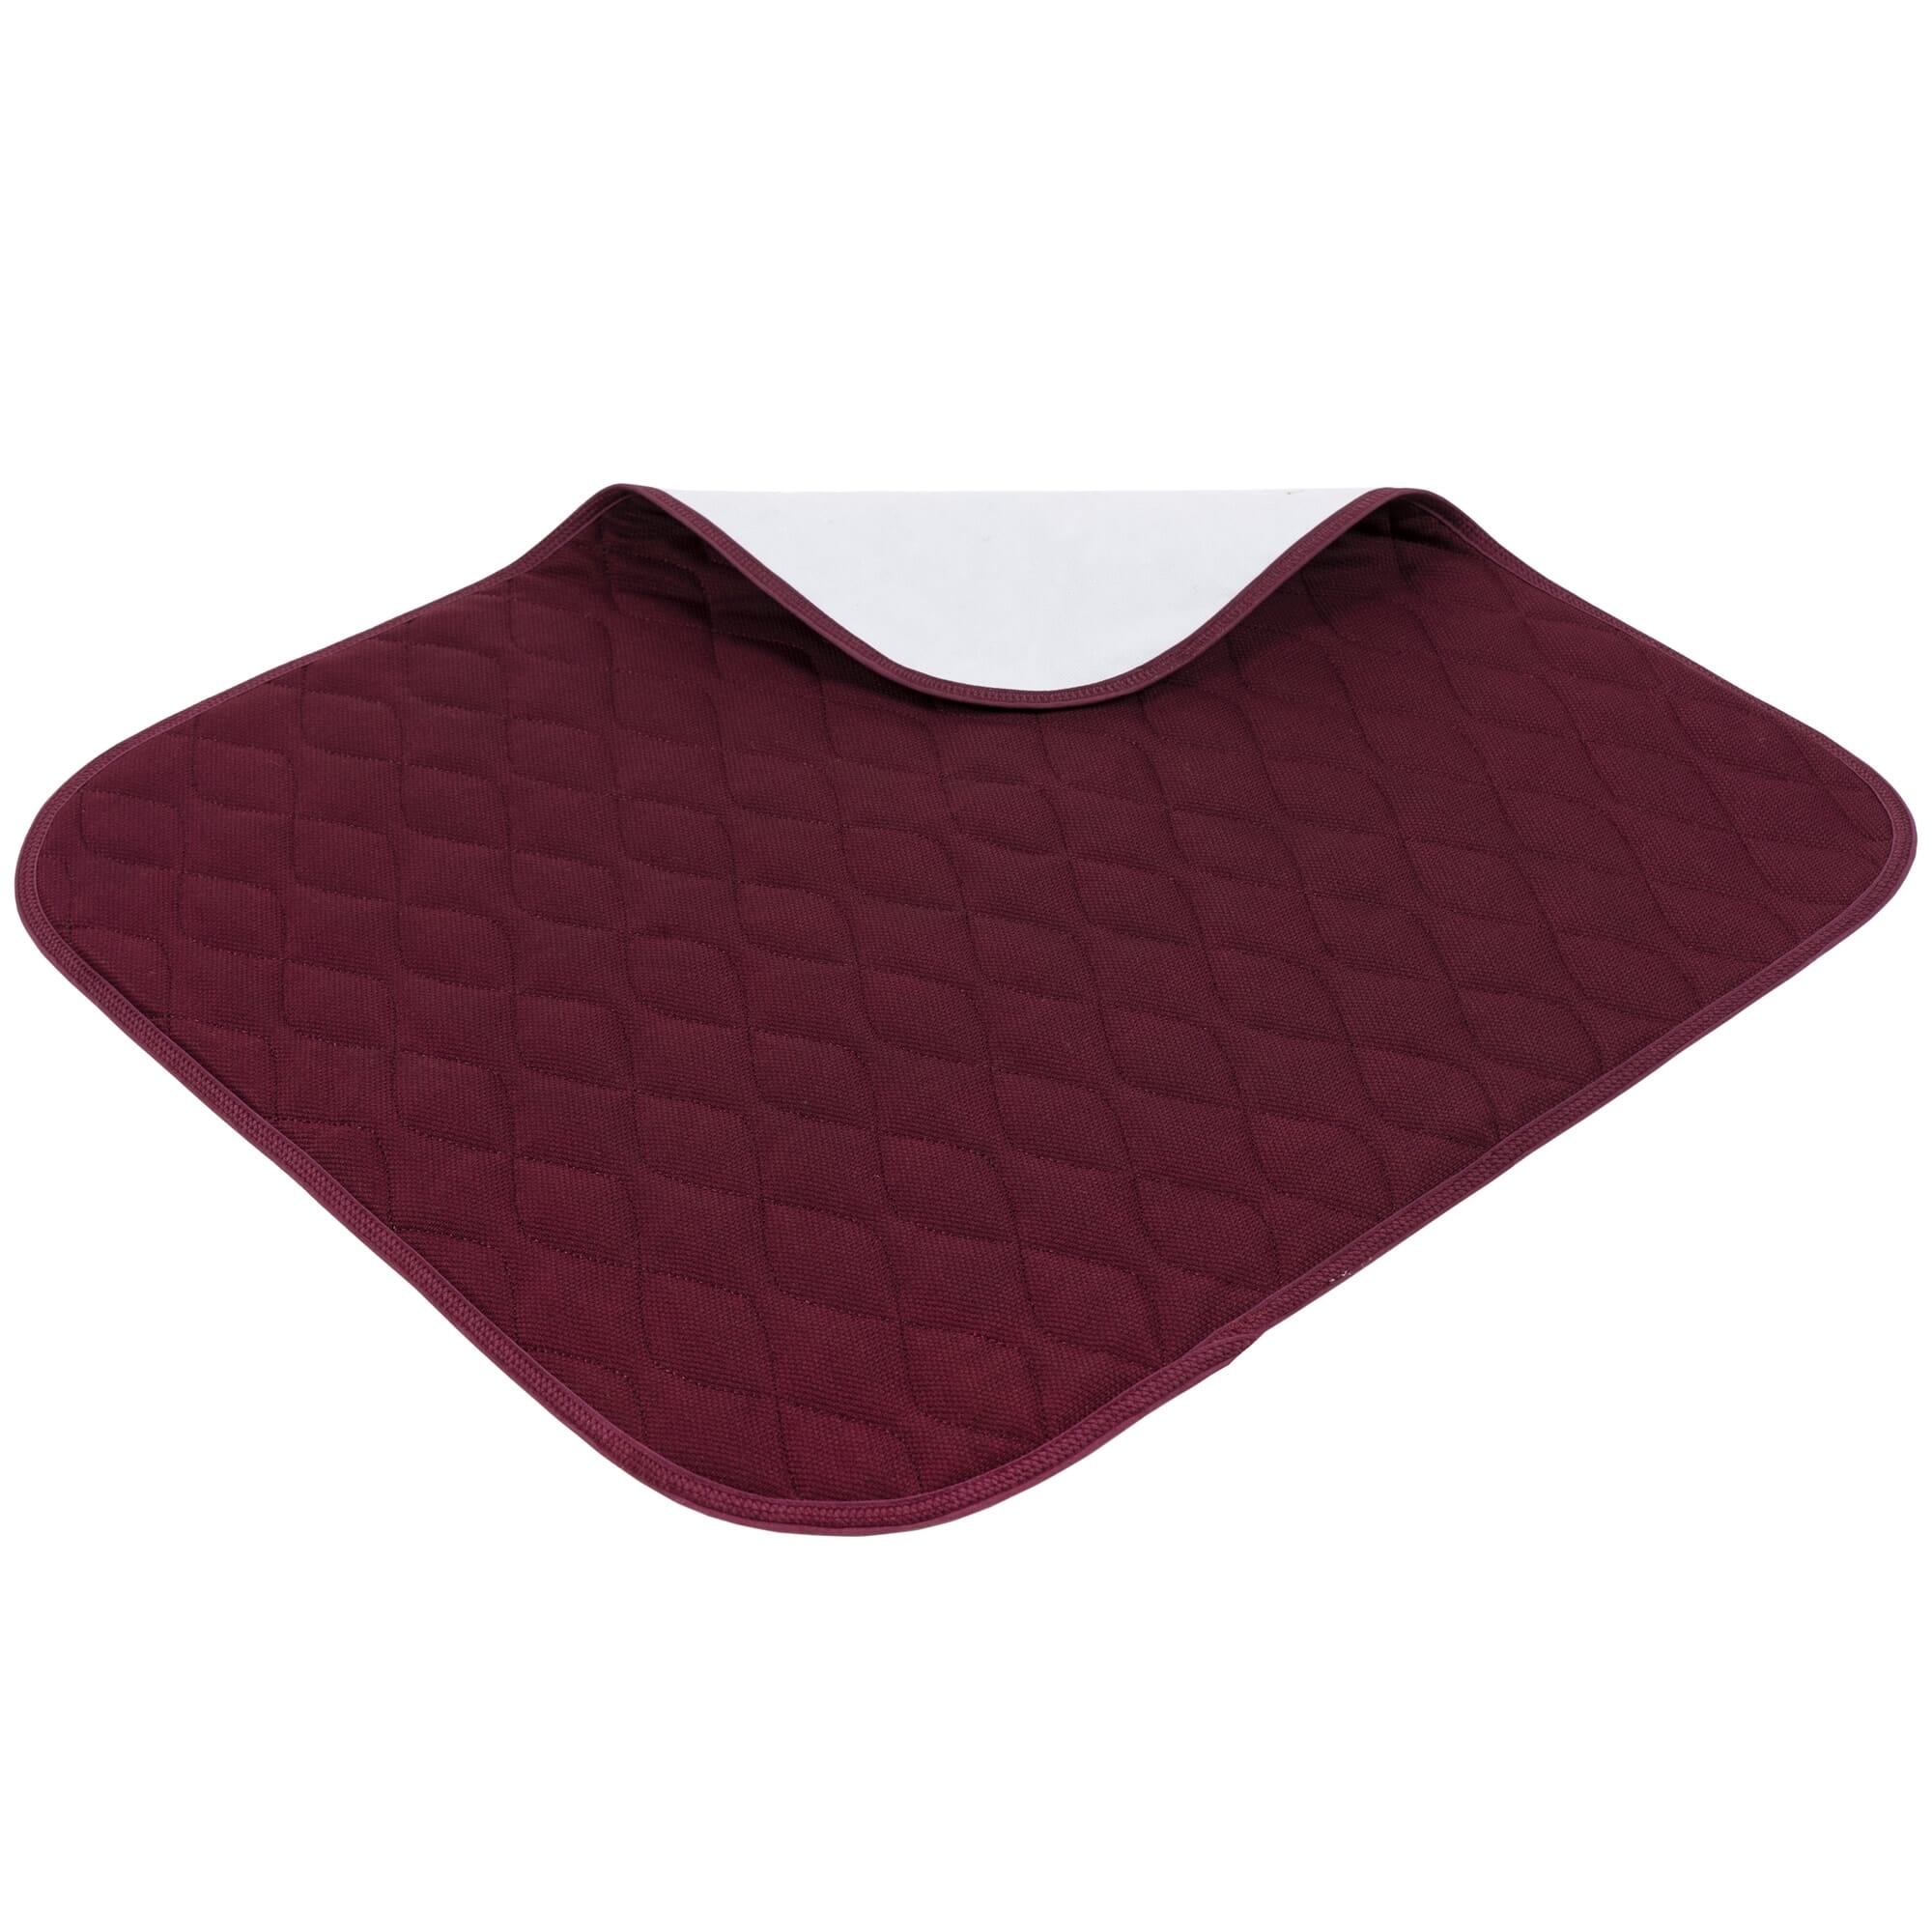 View Economy Chair Pad Maroon information